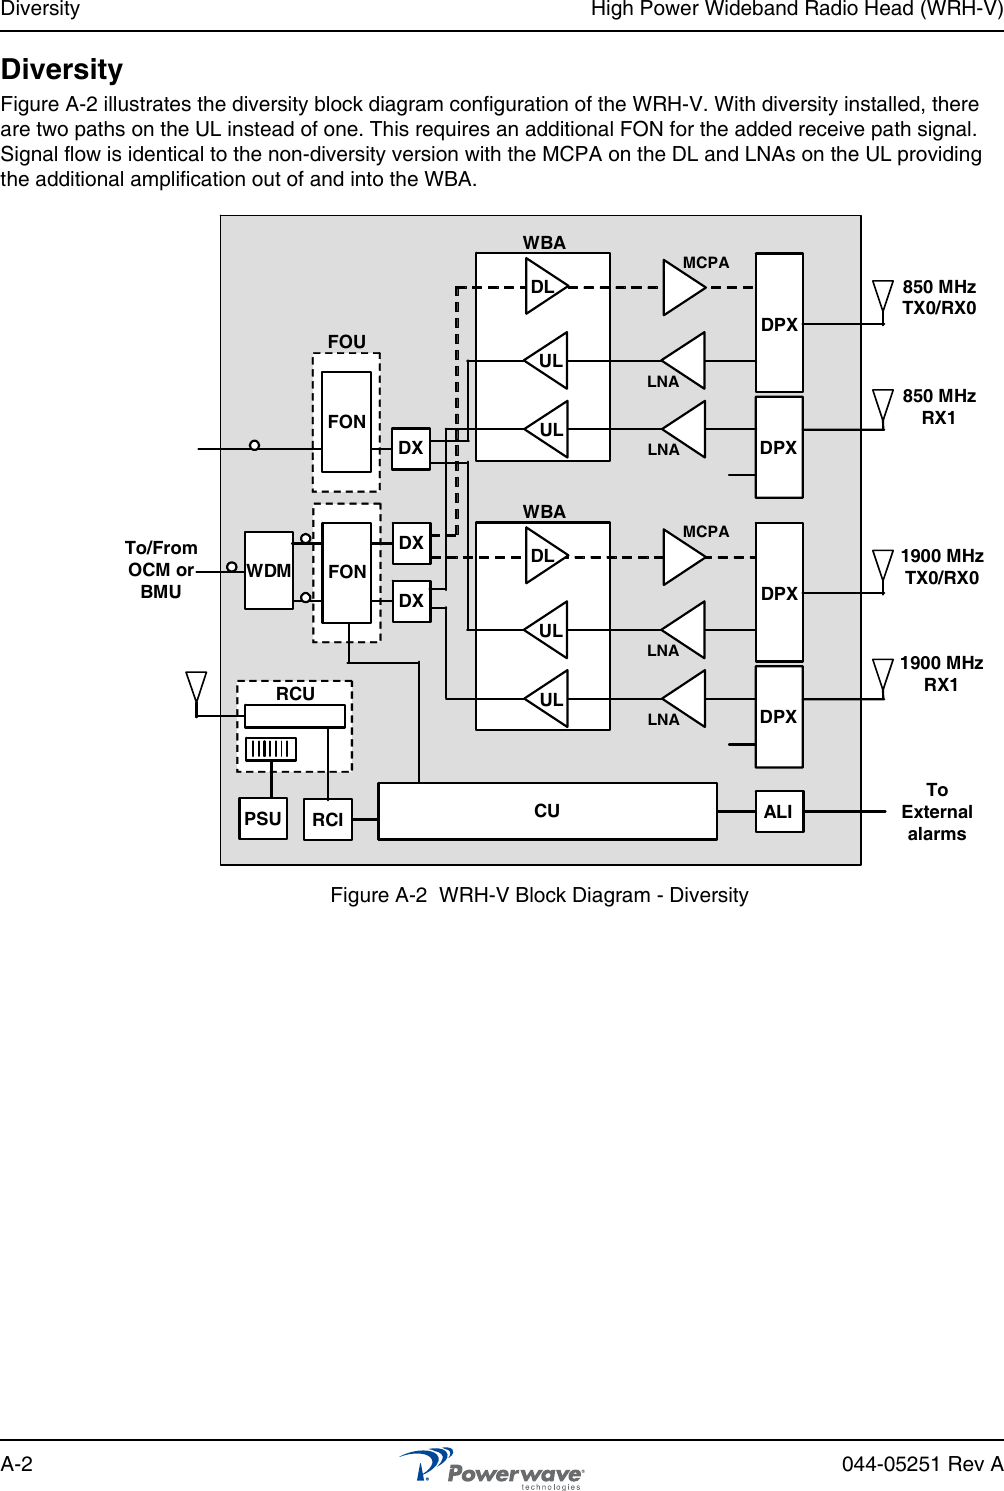 Diversity High Power Wideband Radio Head (WRH-V)A-2 044-05251 Rev ADiversityFigure A-2 illustrates the diversity block diagram configuration of the WRH-V. With diversity installed, there are two paths on the UL instead of one. This requires an additional FON for the added receive path signal. Signal flow is identical to the non-diversity version with the MCPA on the DL and LNAs on the UL providing the additional amplification out of and into the WBA.Figure A-2  WRH-V Block Diagram - DiversityWDMDXDX DPXWBADLLNAMCPATo/FromOCM orBMURCURCIPSU CUFONALIToExternalalarmsFOUDXLNADPXDPXWBALNAMCPALNADPXULDLFON1900 MHzTX0/RX0850 MHzTX0/RX0850 MHzRX11900 MHzRX1ULULUL